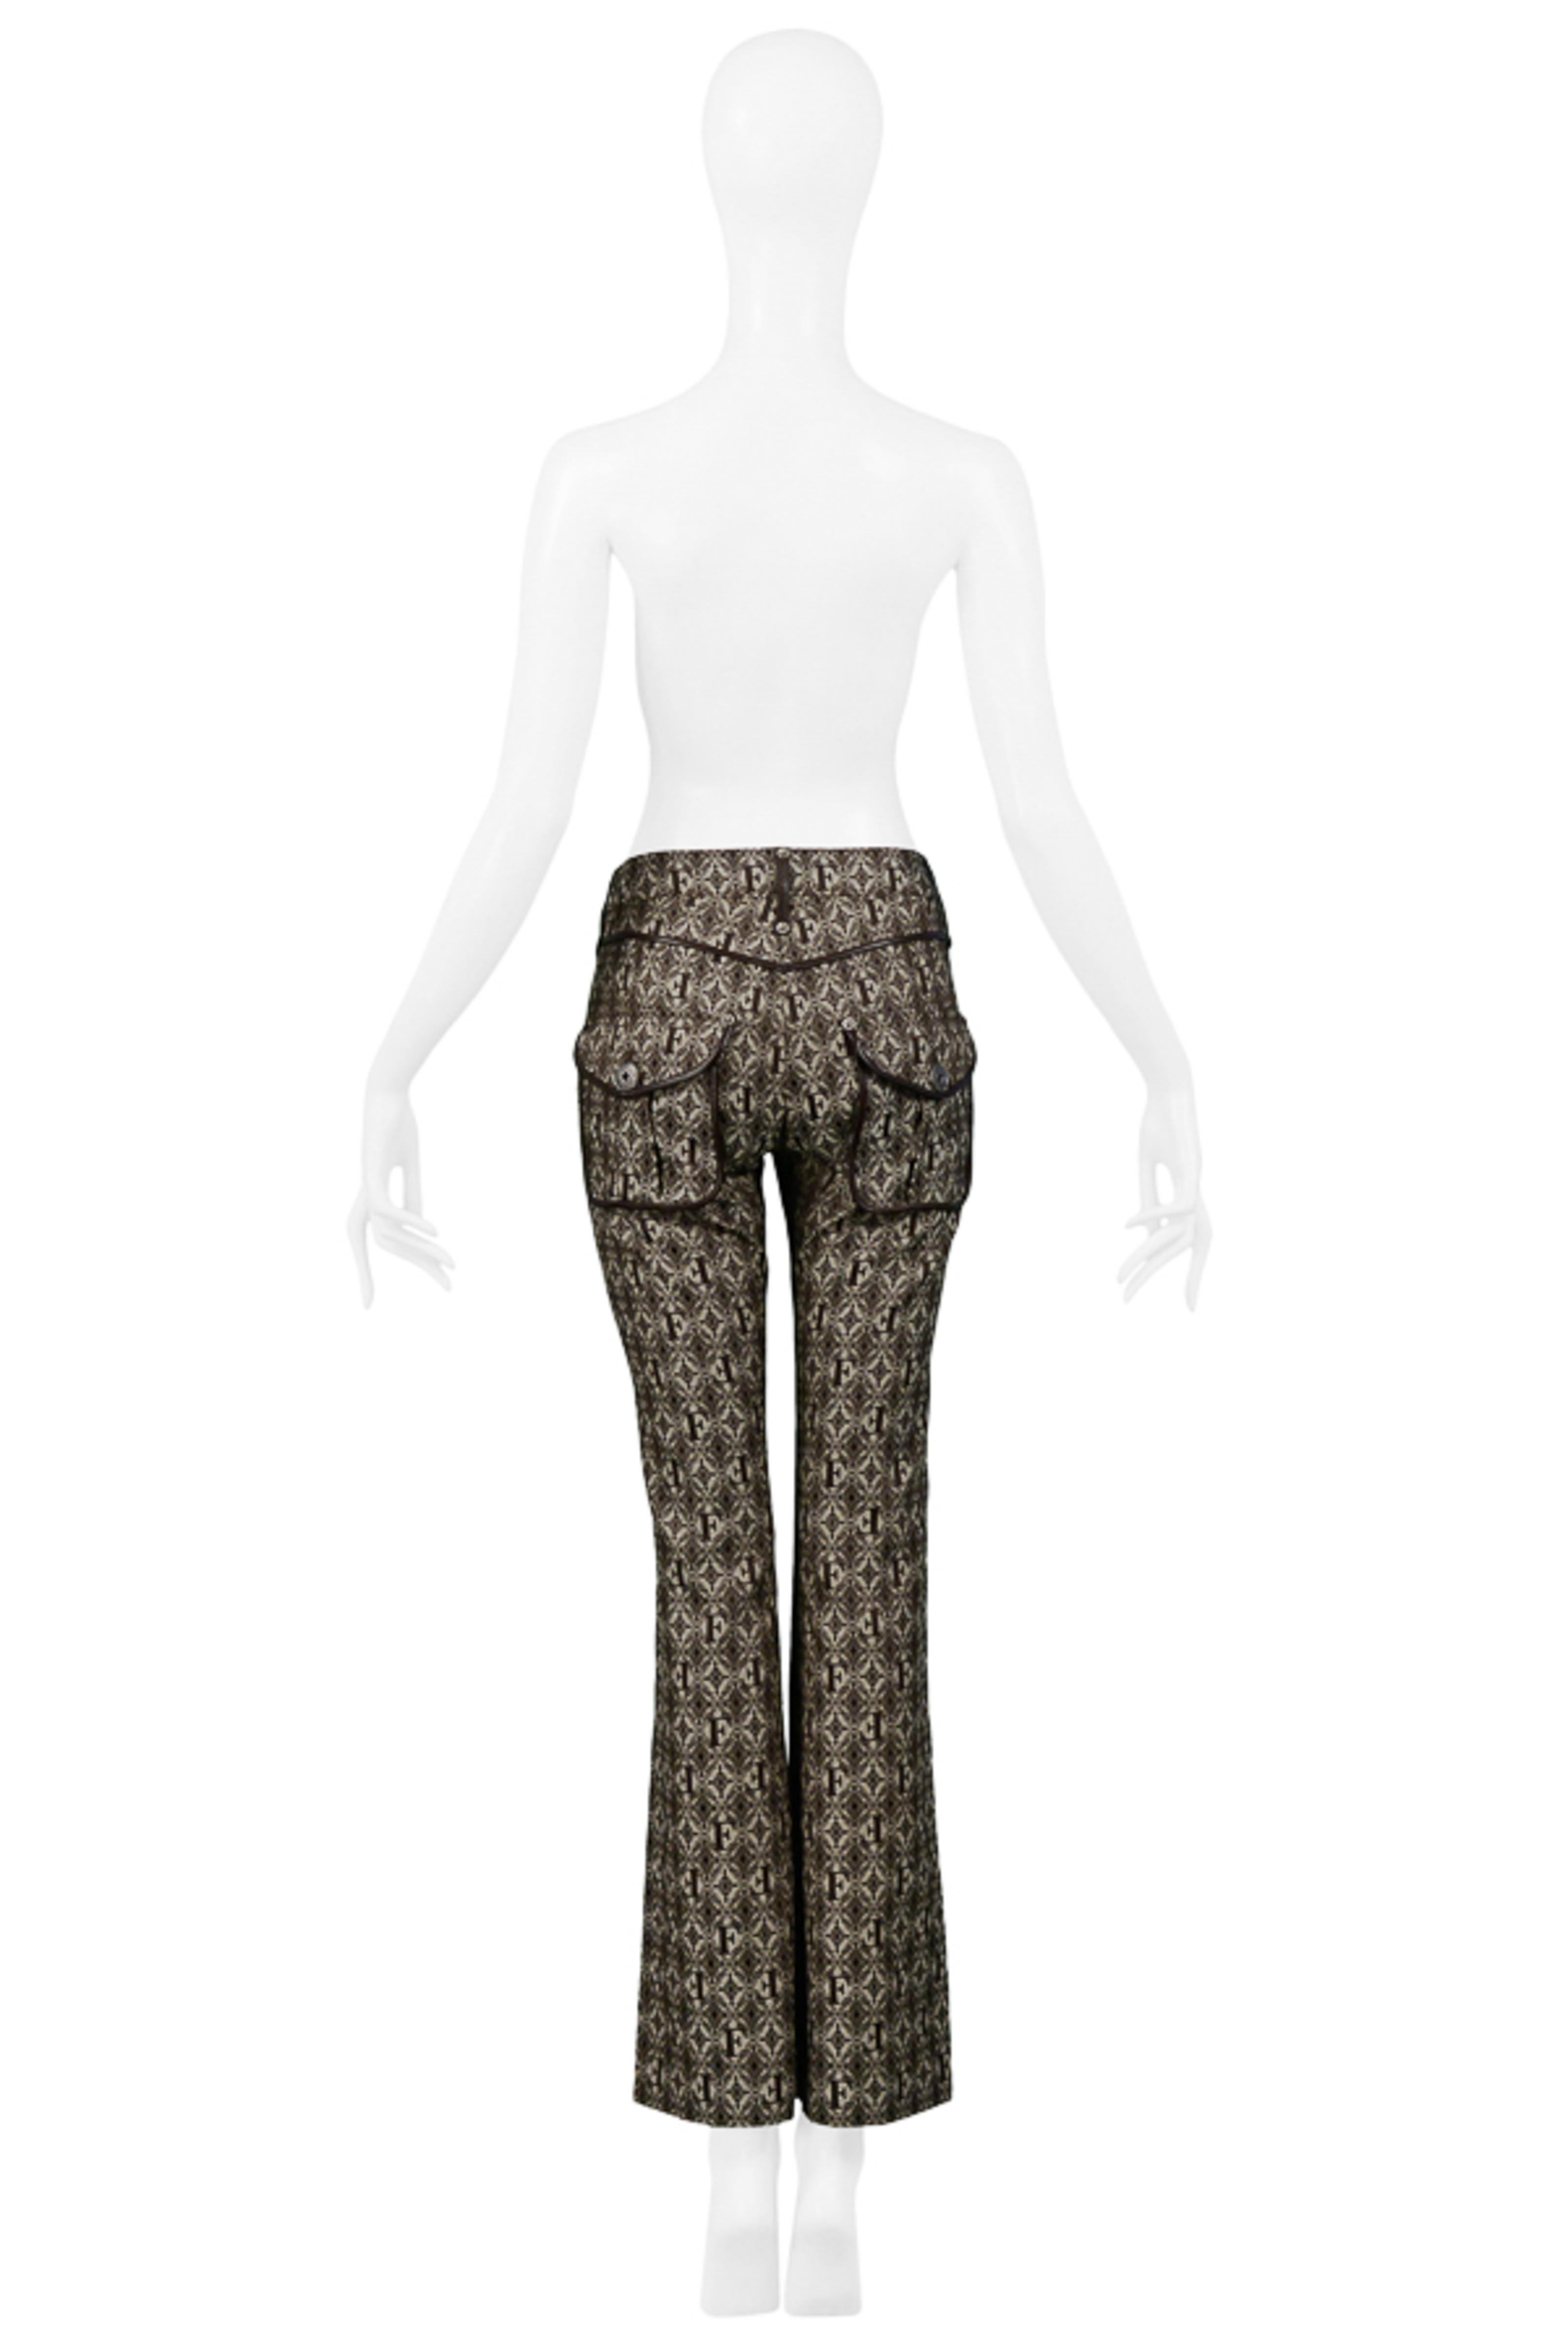 Gianfranco Ferre Brown Logo Pants With Leather Trim 2006 For Sale 2